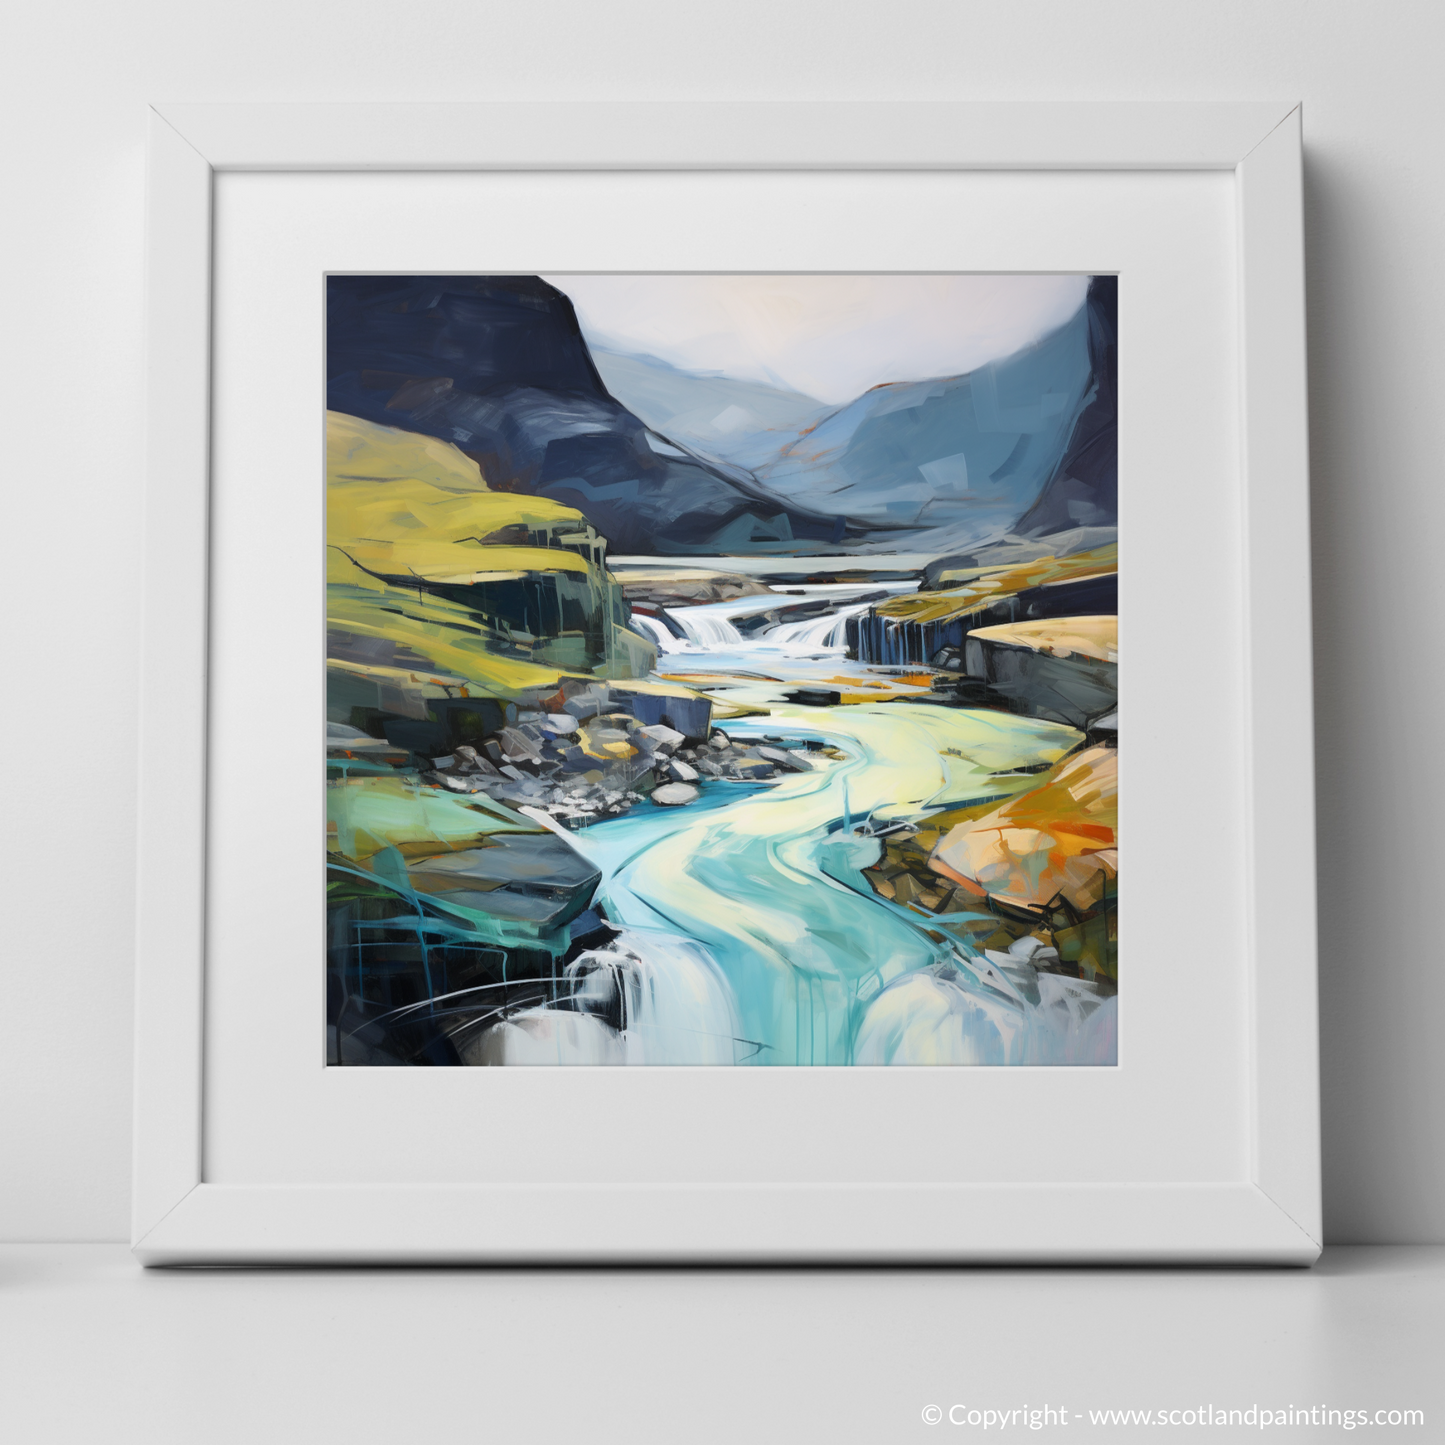 Tempestuous Fairy Pools: An Abstract Impression of Skye's Mythical Waters